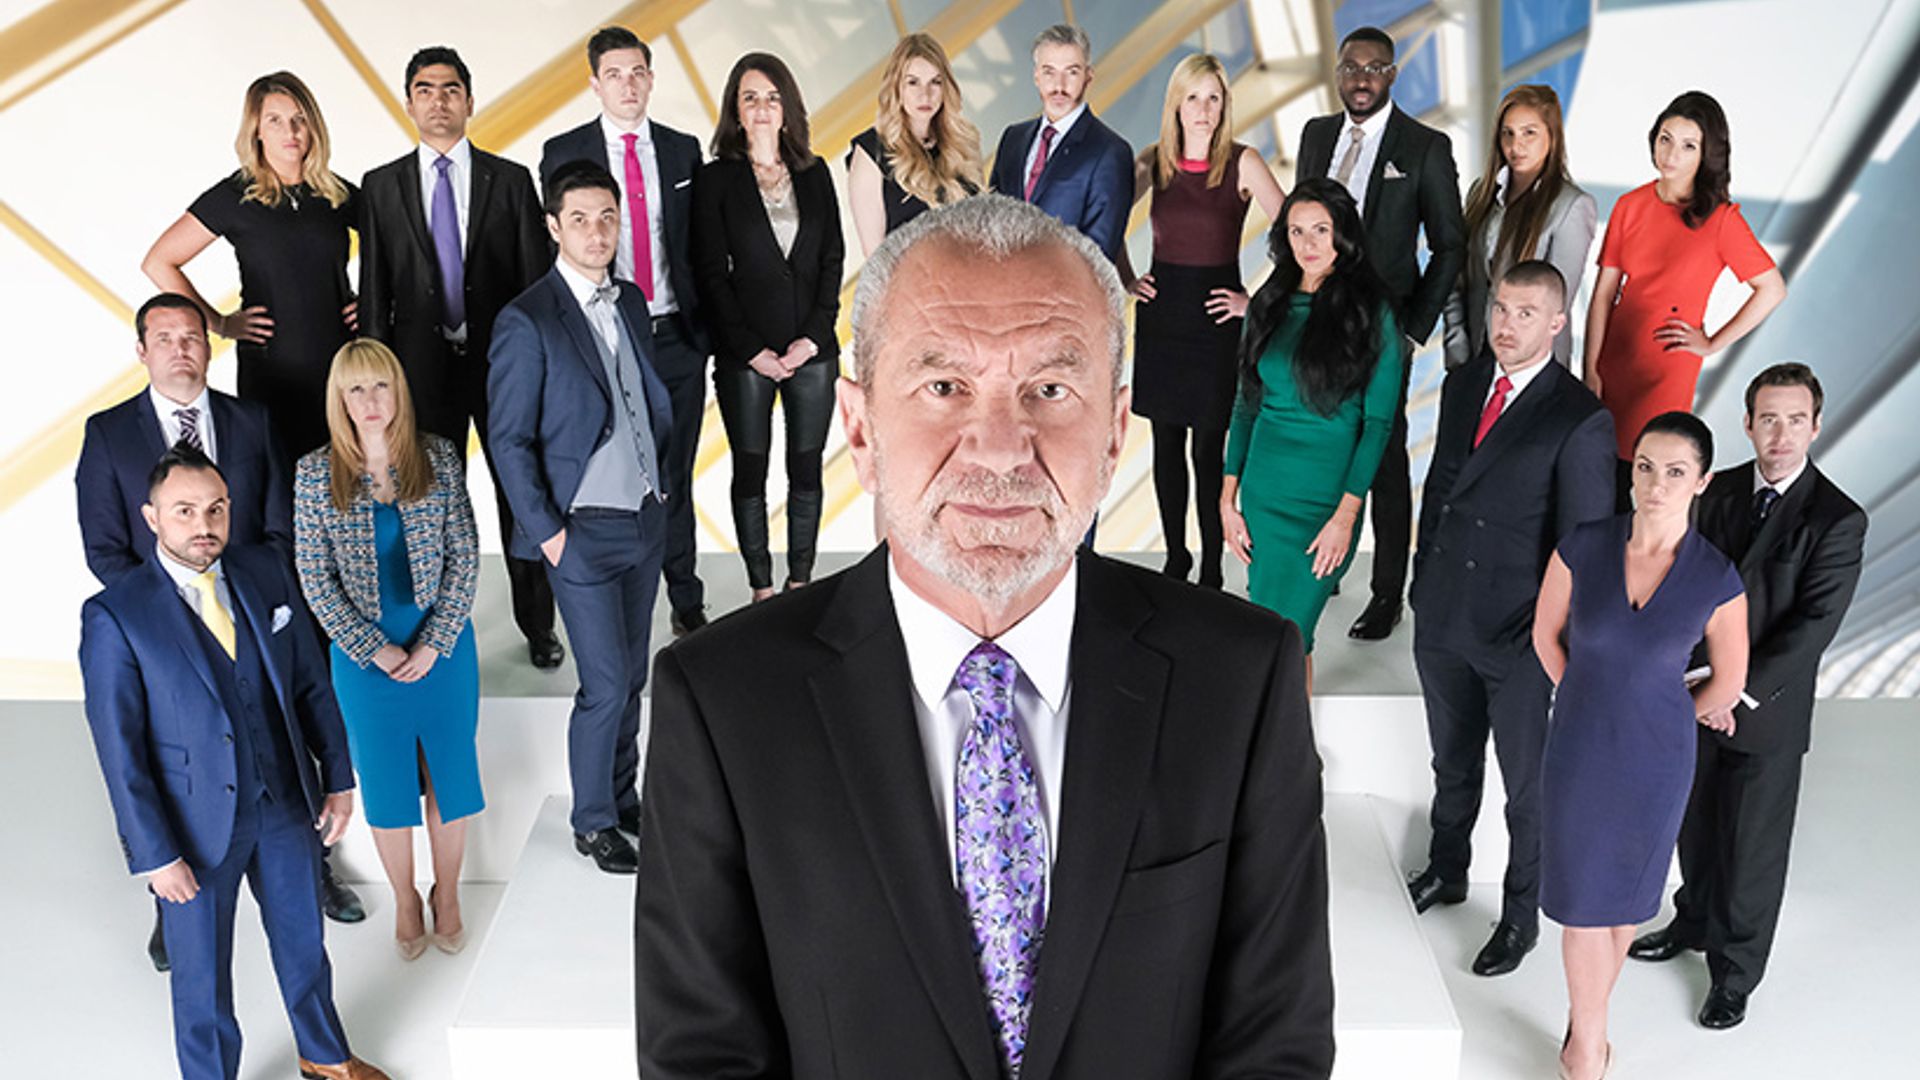 The Apprentice: meet the candidates